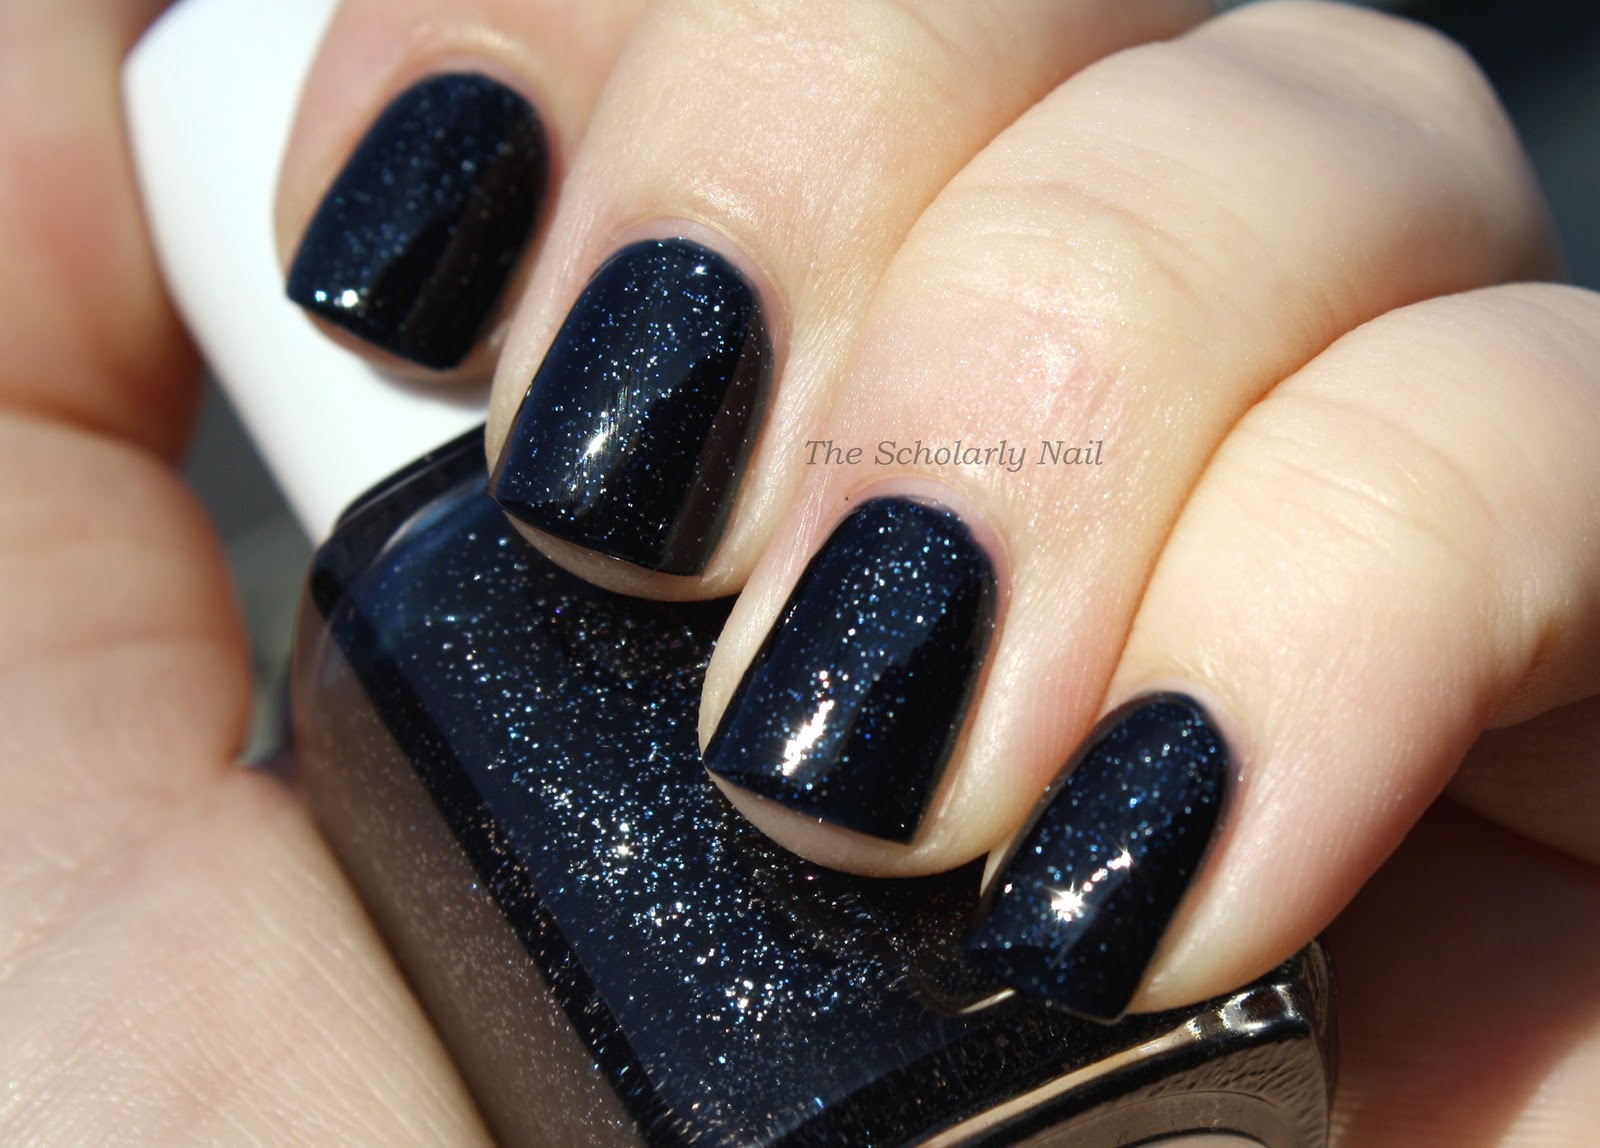 1. Essie Nail Polish in "Starry Starry Night" - wide 6